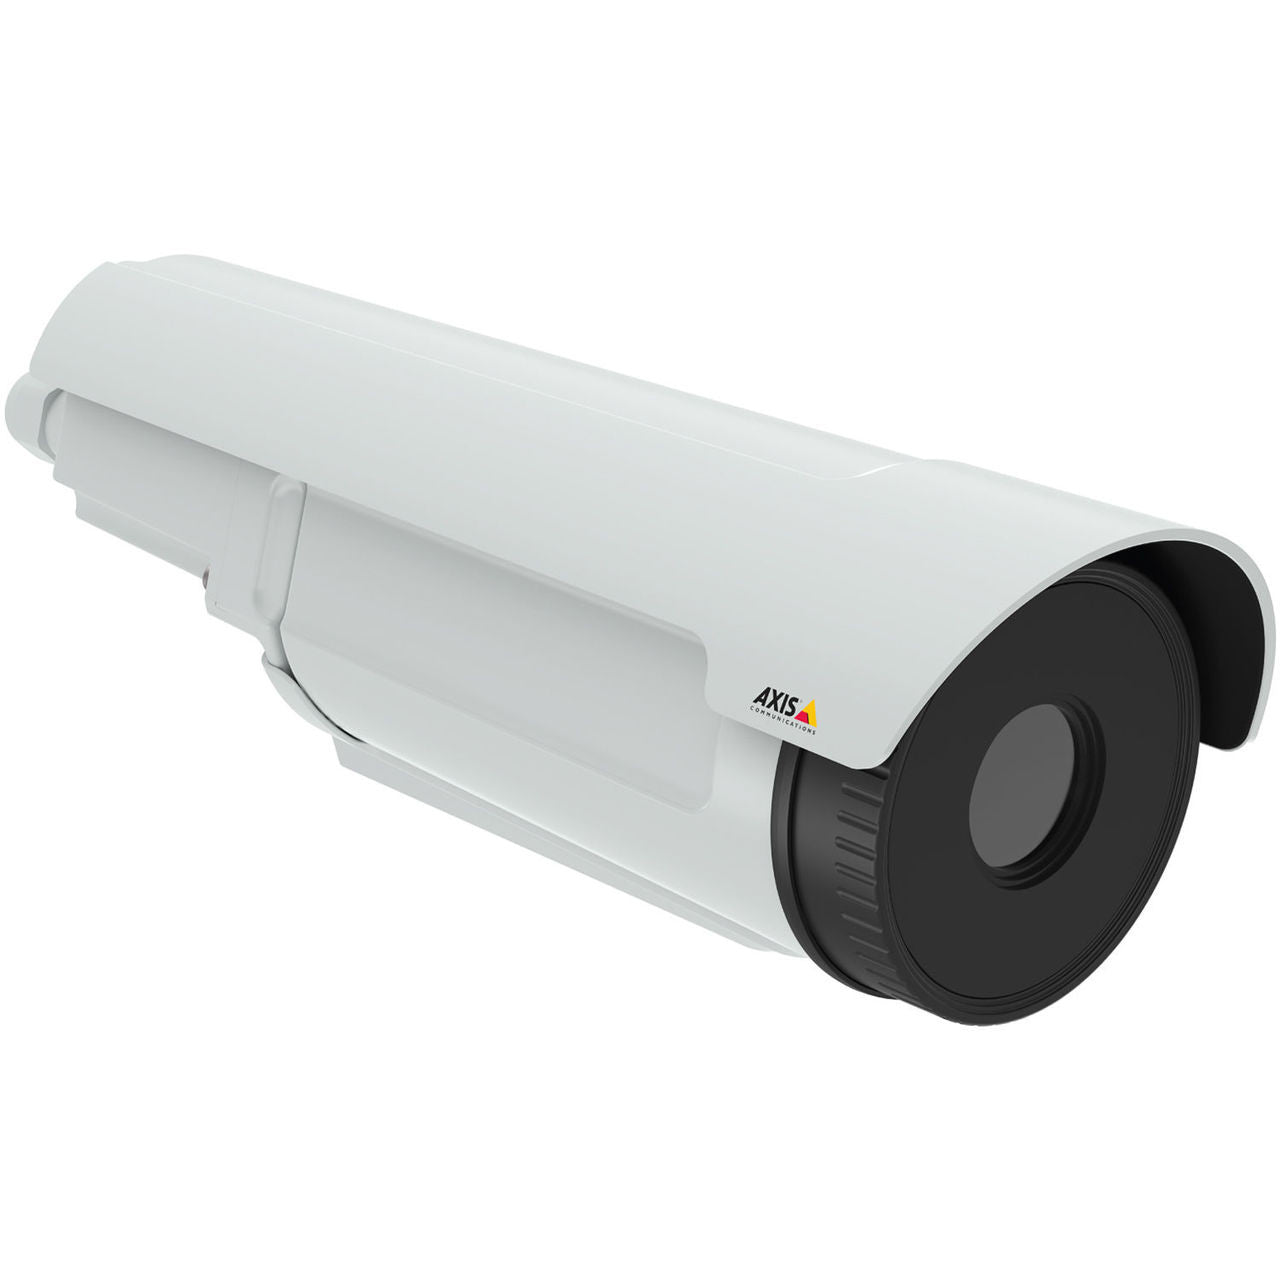 AXIS Q1942-E PT Mount (0983-001) 19mm 30fps Thermal Network Camera